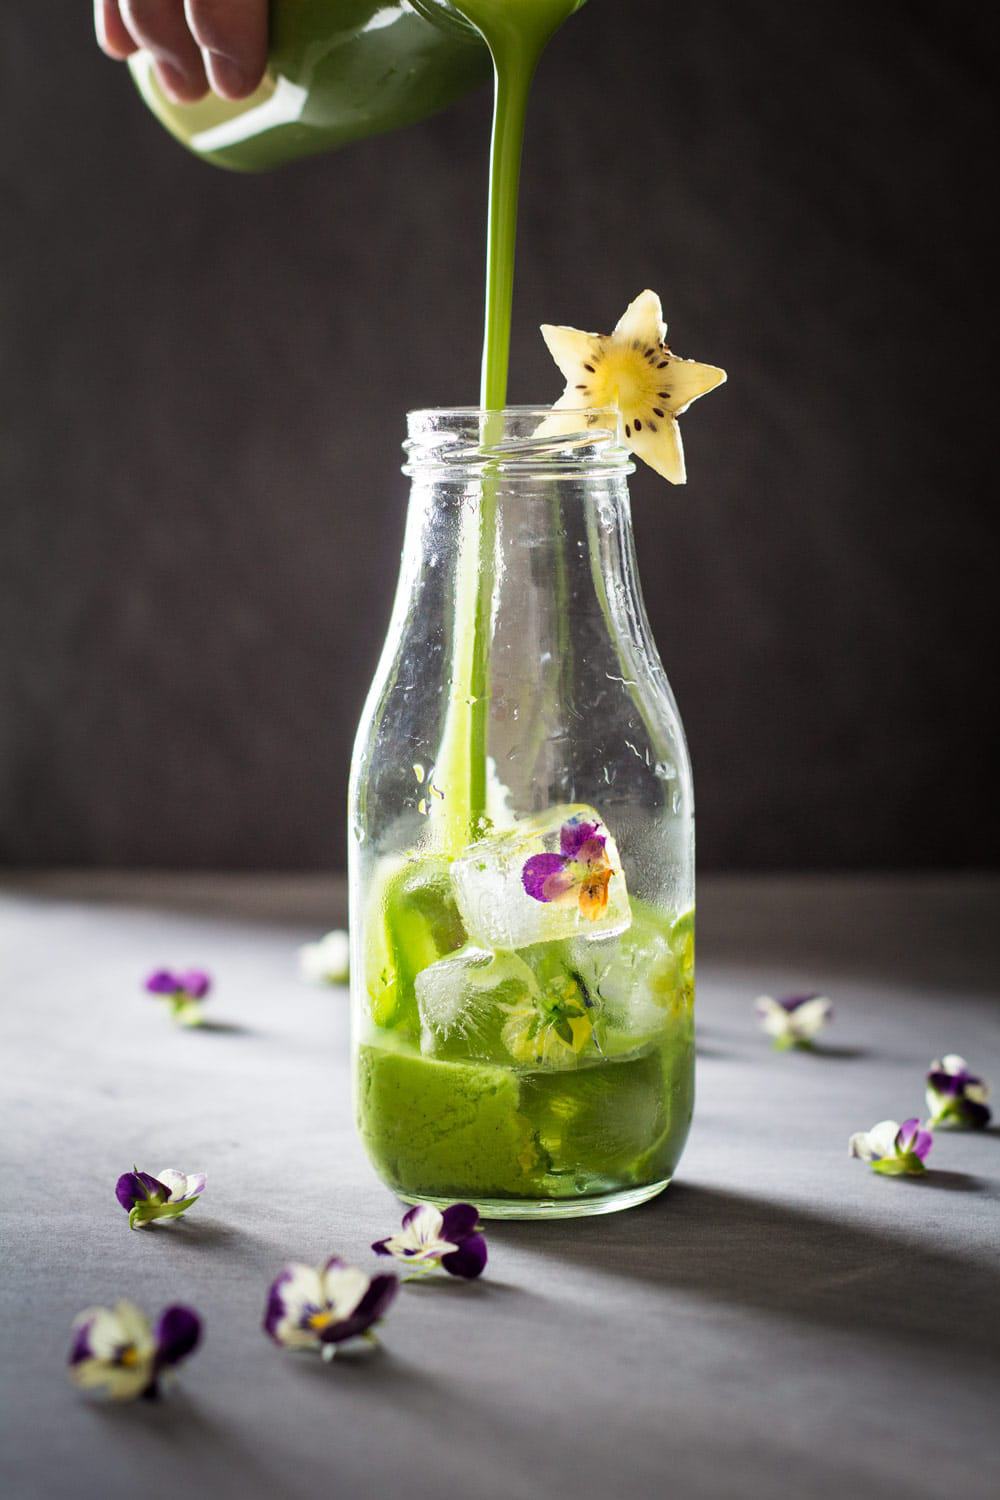 Green Smoothie being poured into a glass bottle decorated with a star-shaped kiwi slice.